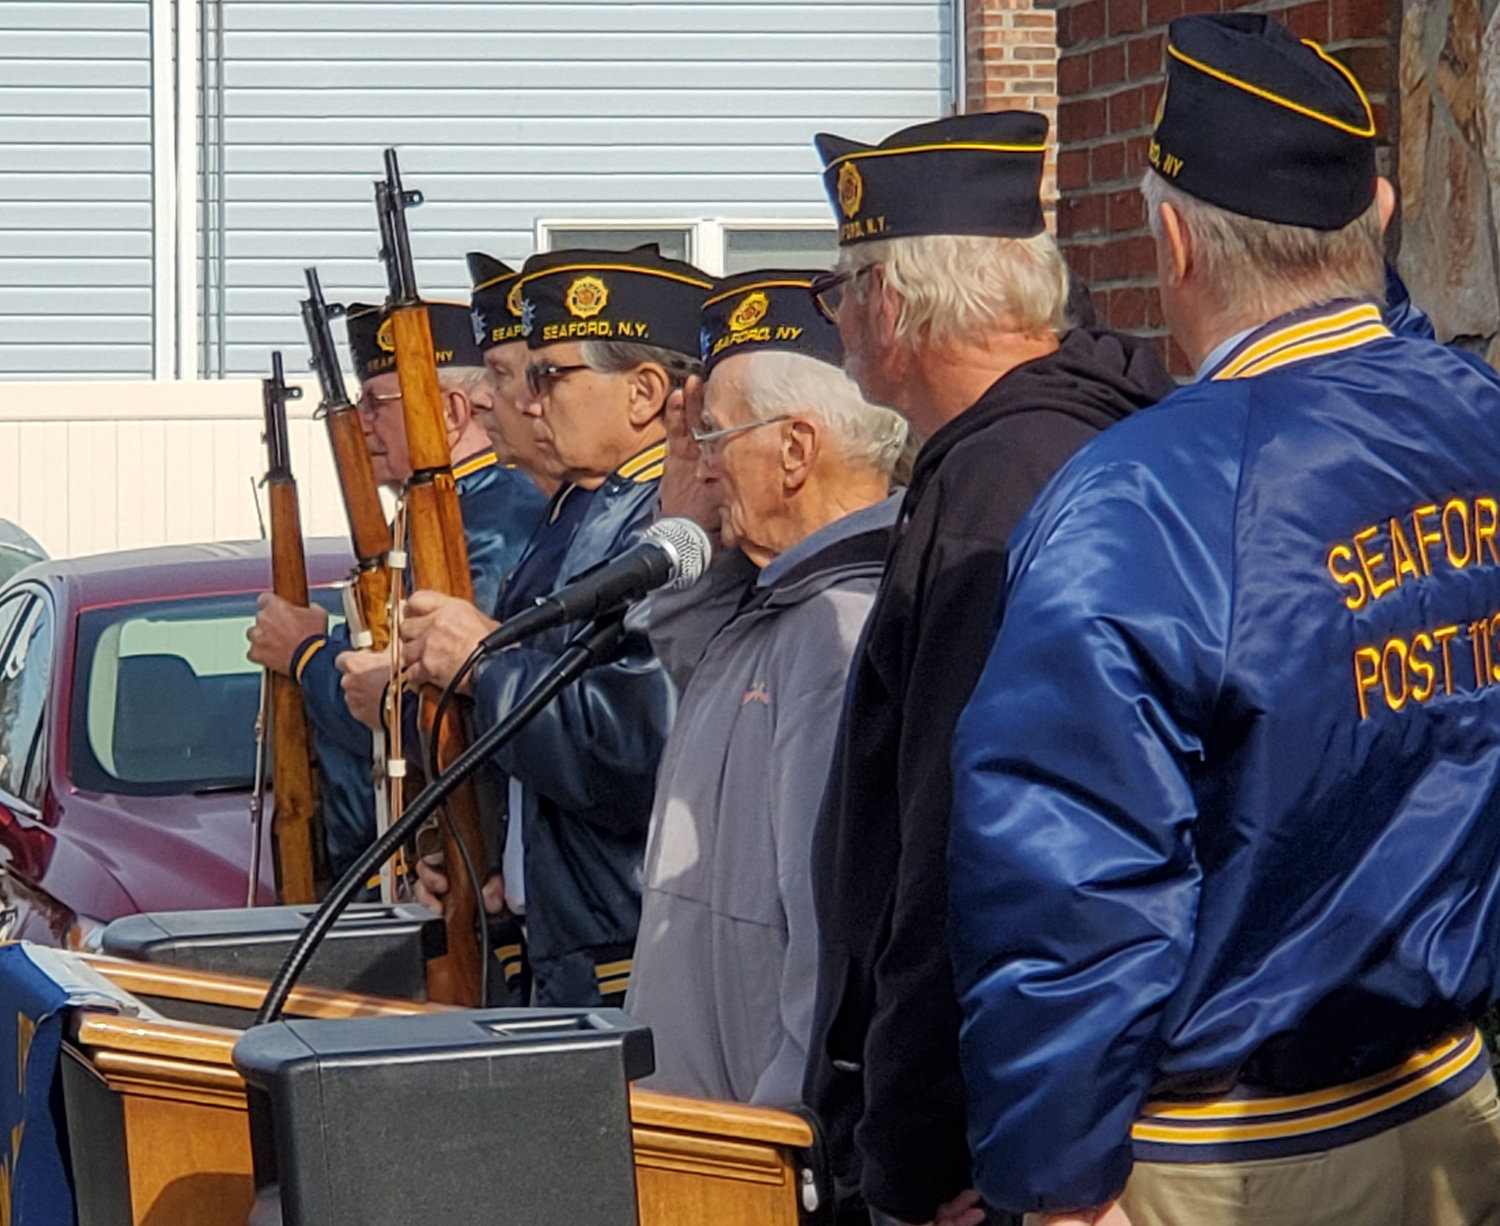 American Legion members shot blanks from rifles into the sky as the ceremony came to its conclusion.